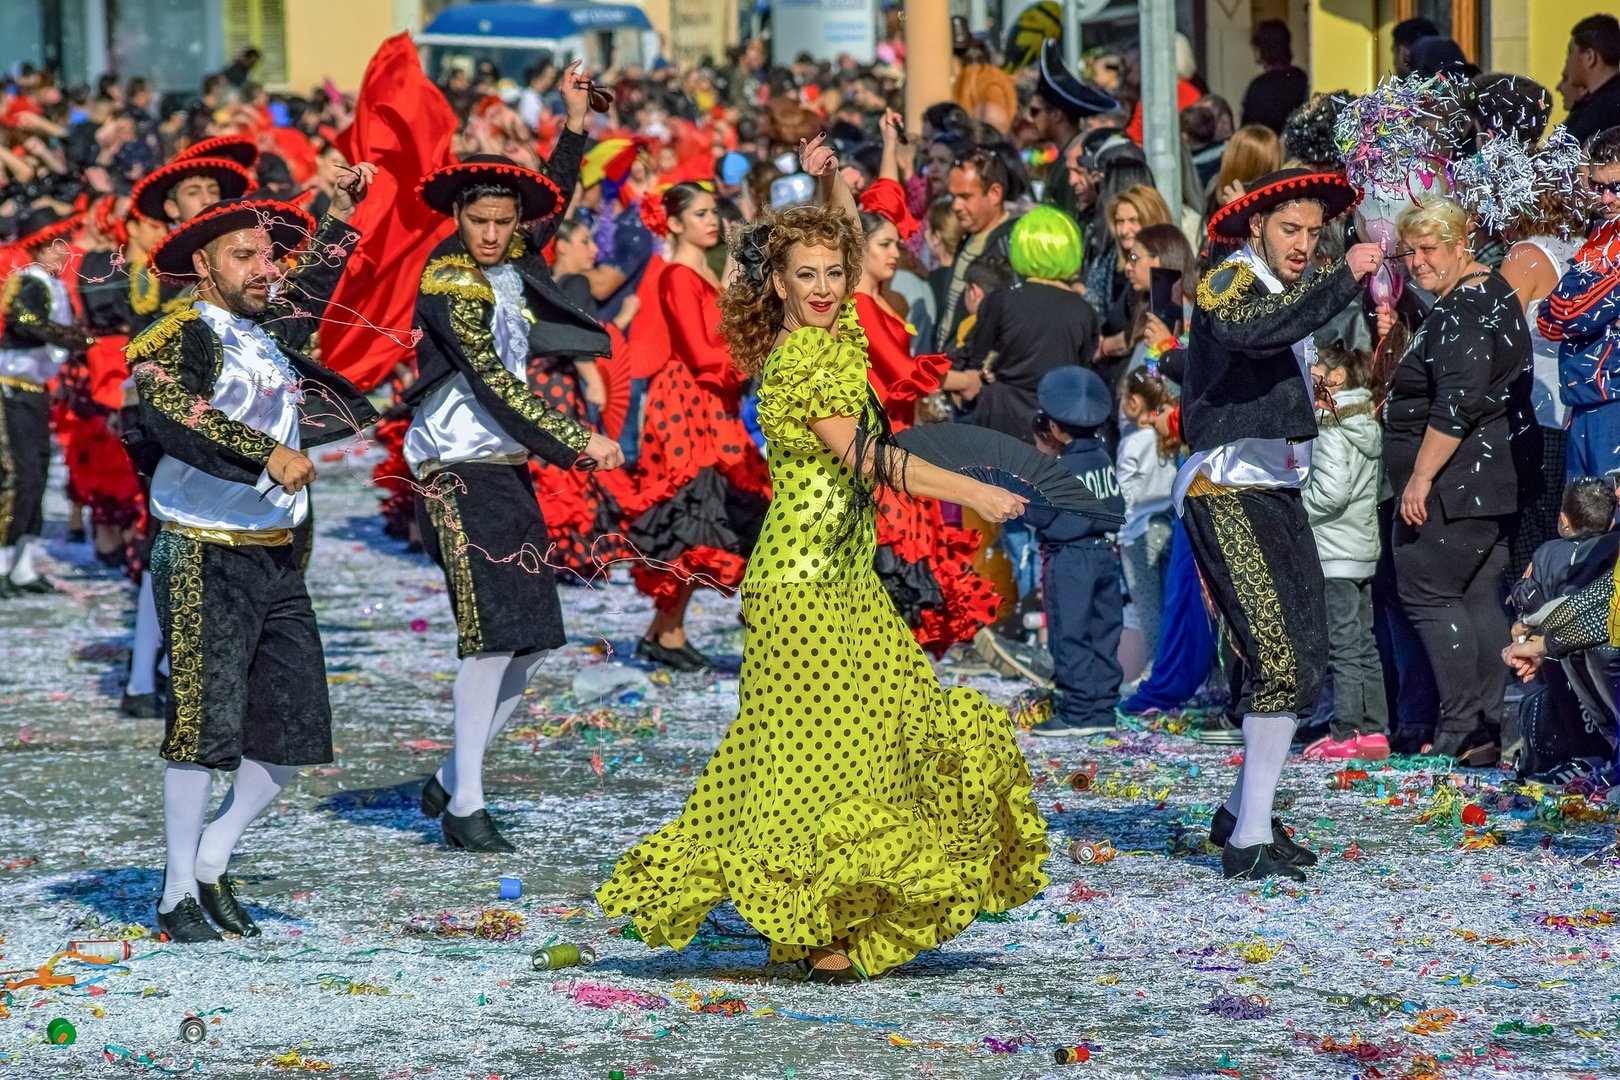 Highlights of Limassol Carnival parade in Cyprus - Global Times